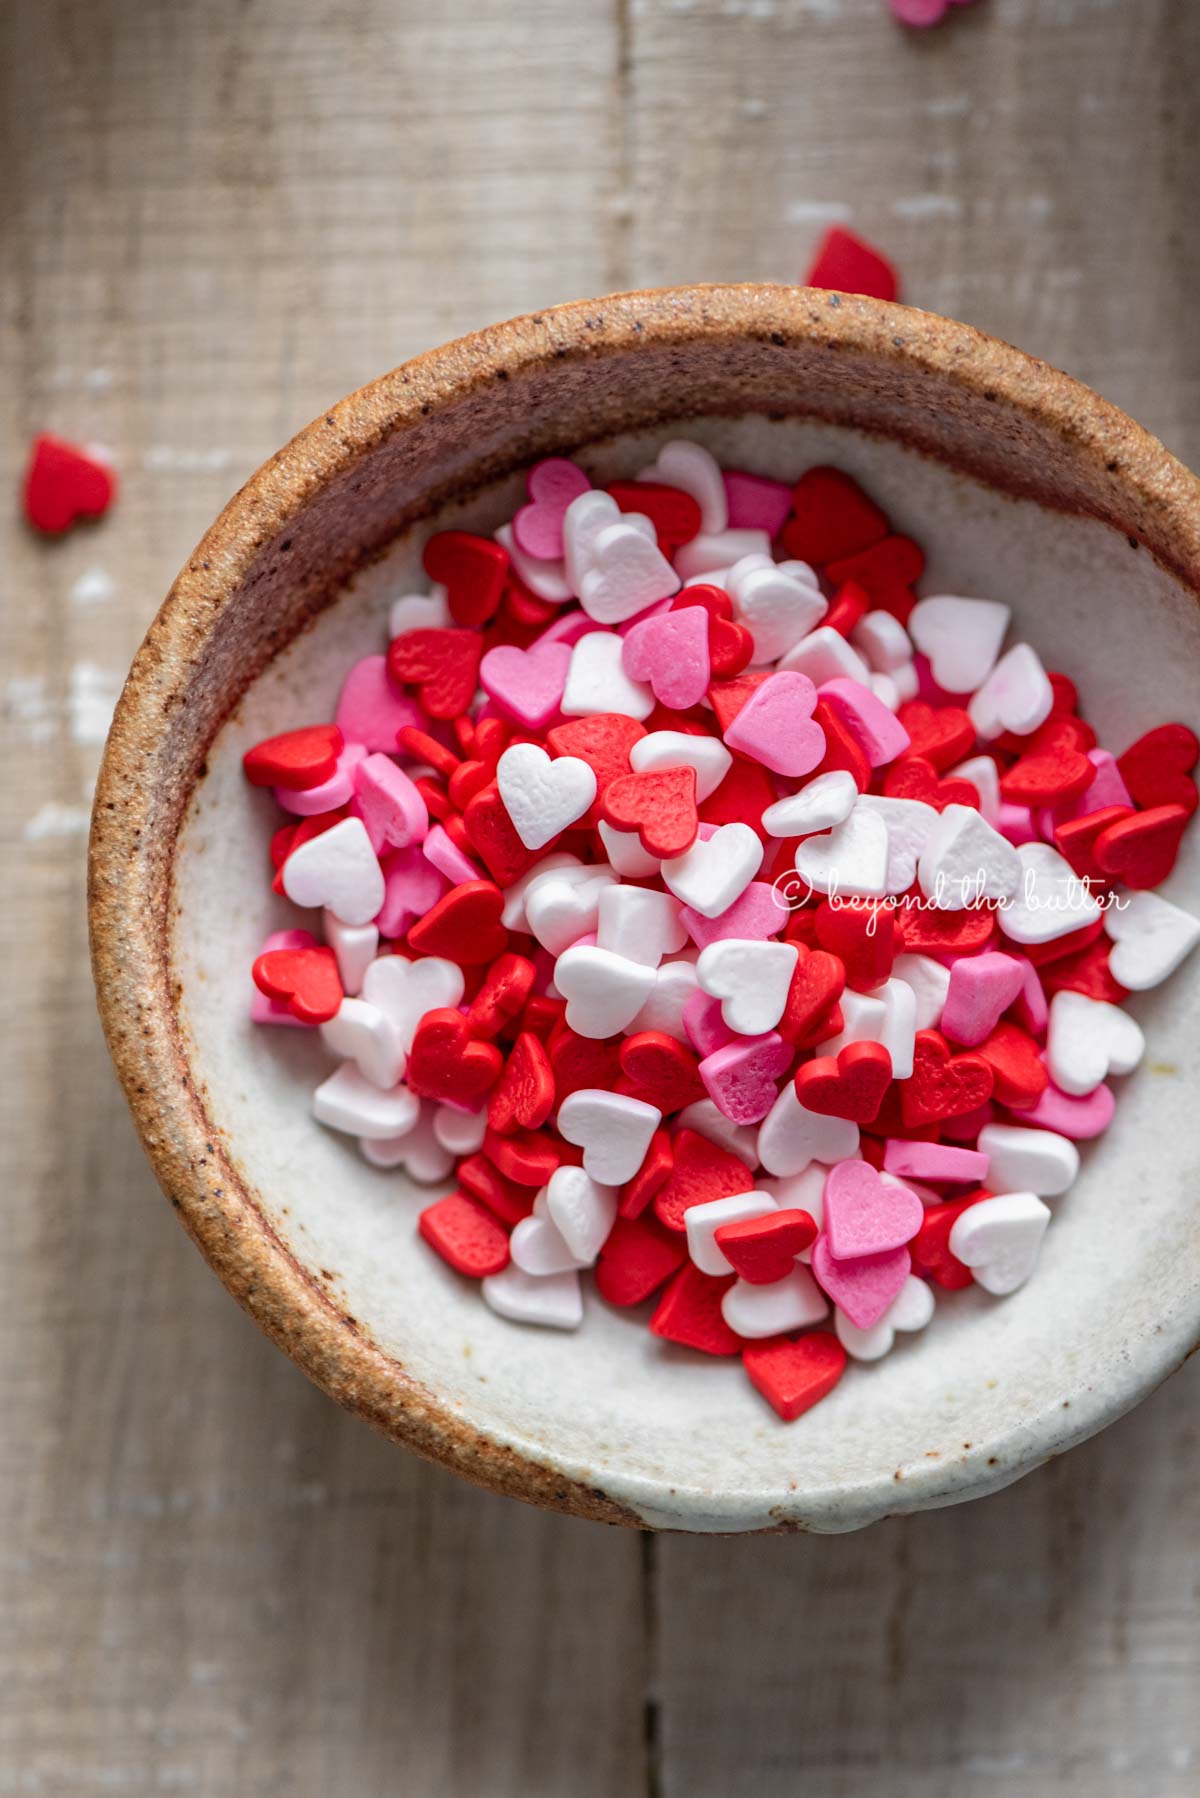 Small bowl of Valentine's Day heart sprinkles Homemade red velvet cupcakes with one opened and half eaten with a small bowl of Valentine's Day sprinkles on light wood background | All images © Beyond the Butter®